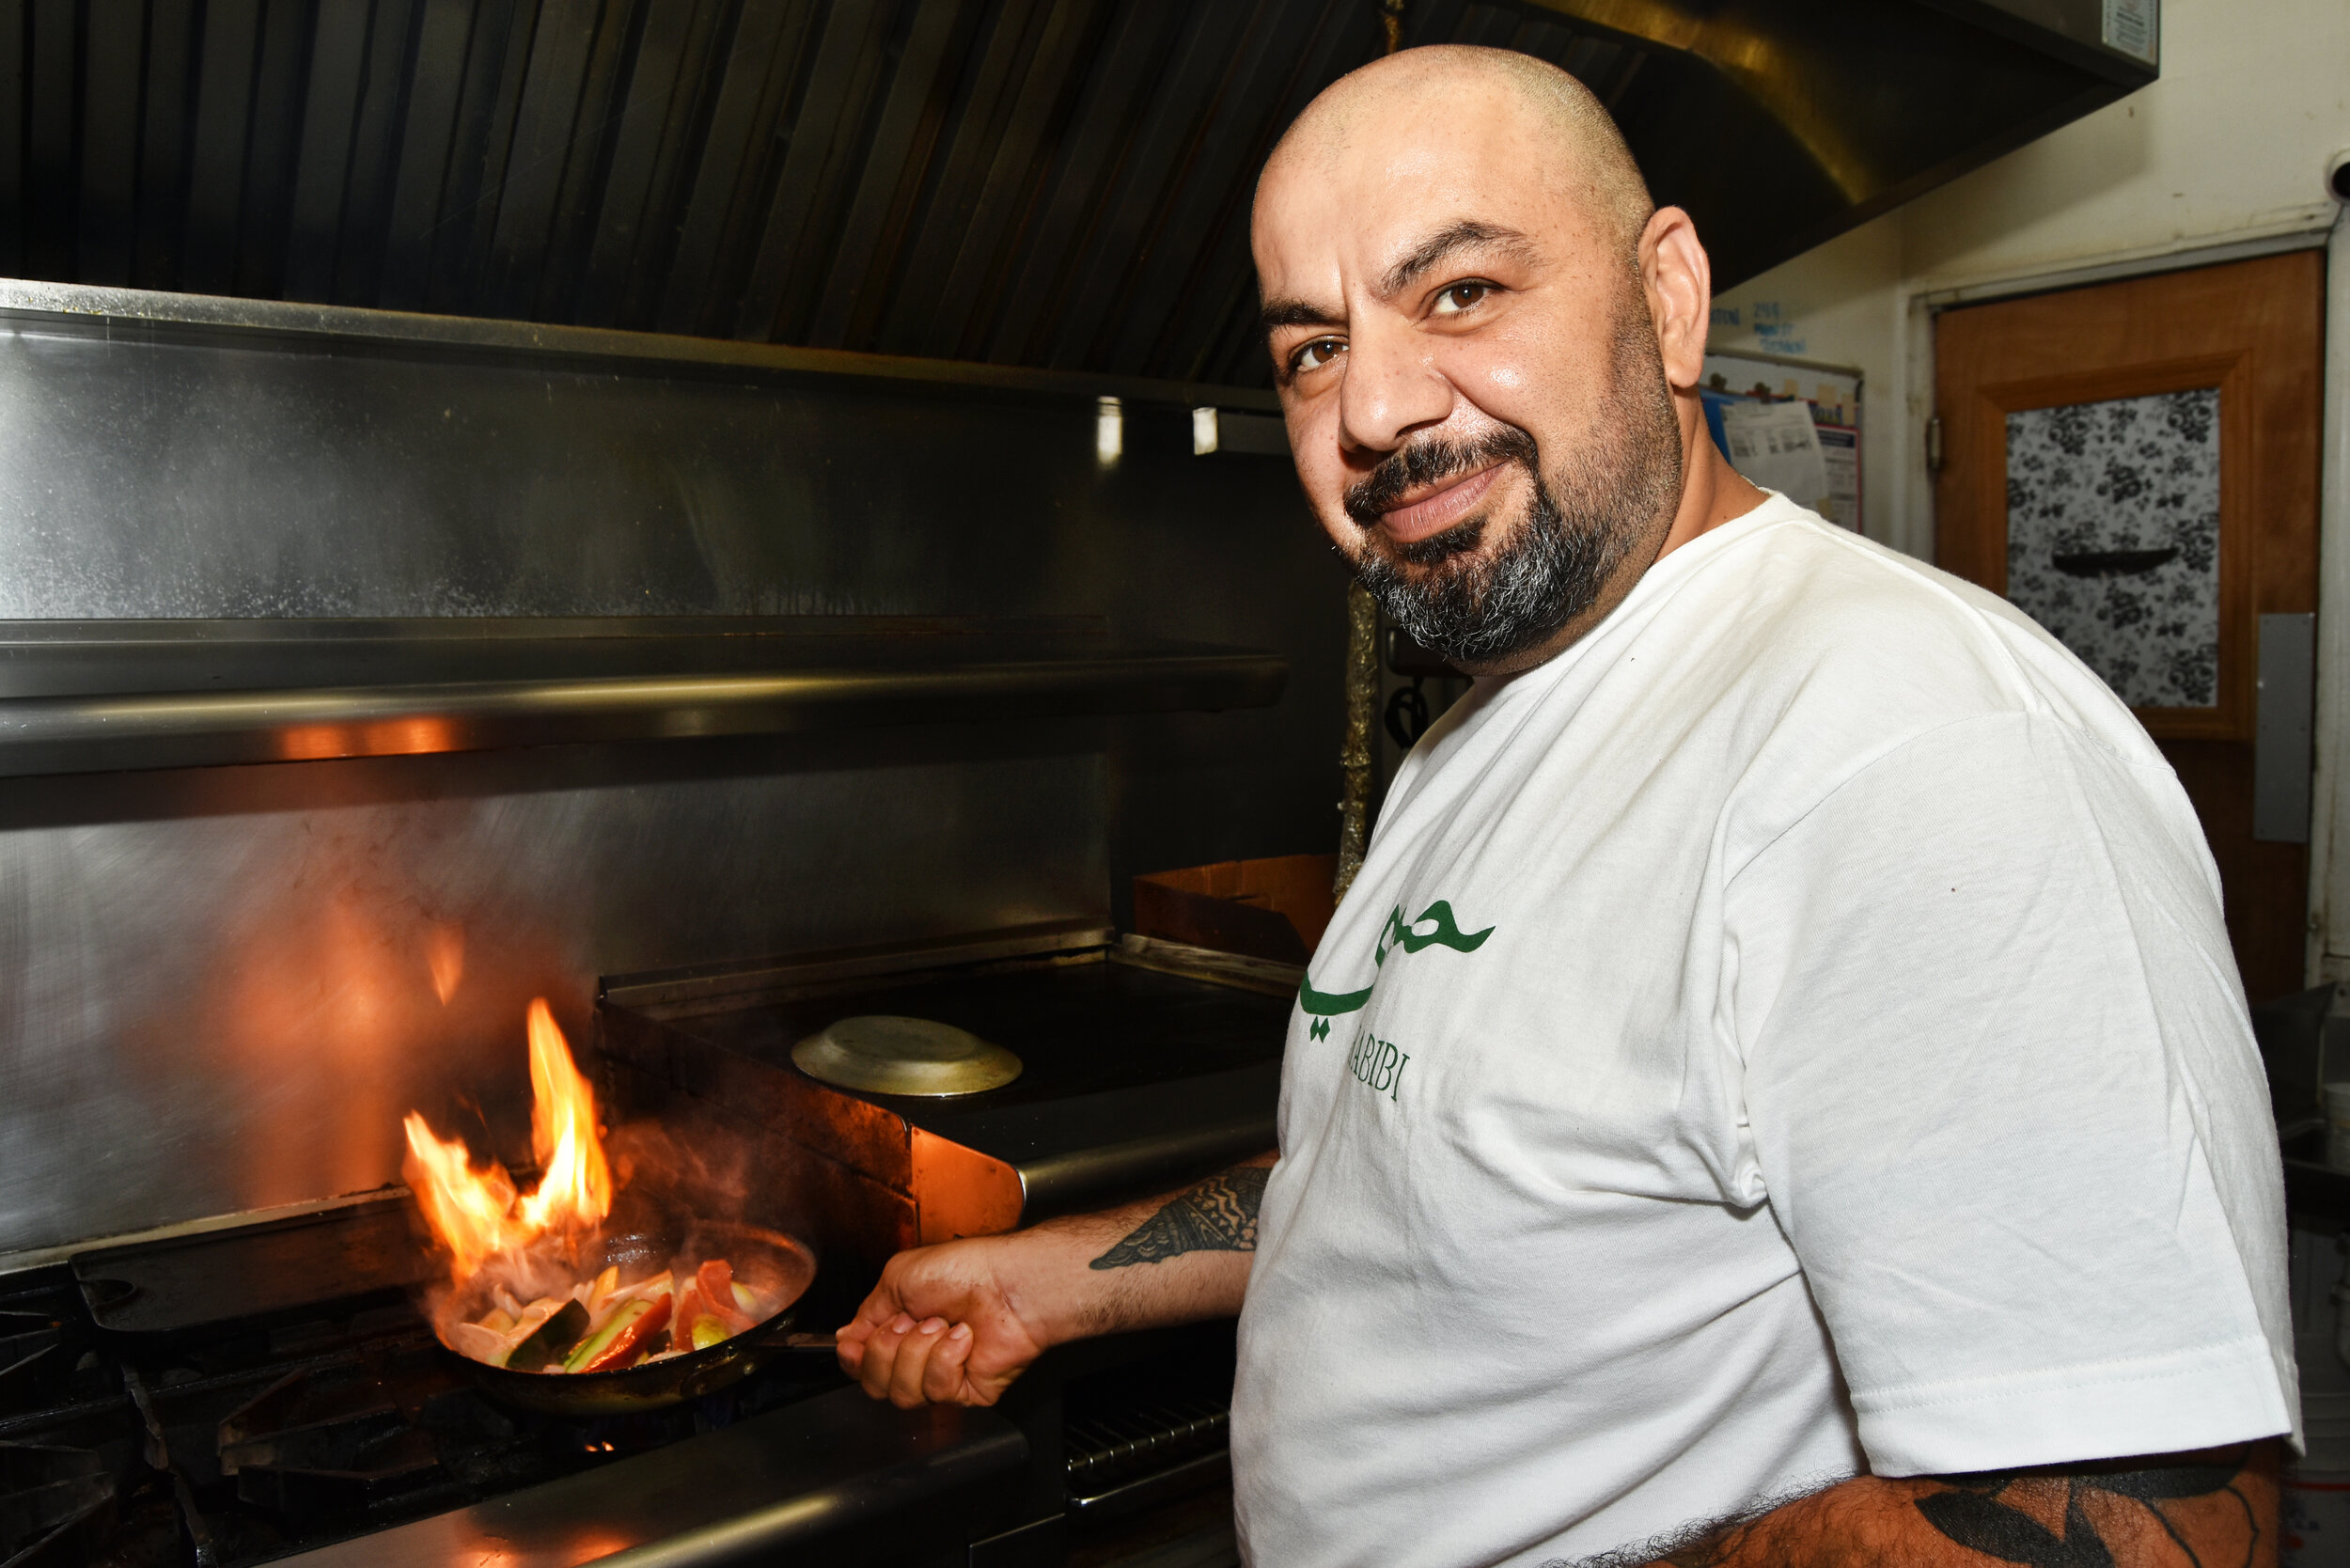  Kamel Jamal is the owner of Ziatun, a Palestinian restaurant in Beacon, New York.  